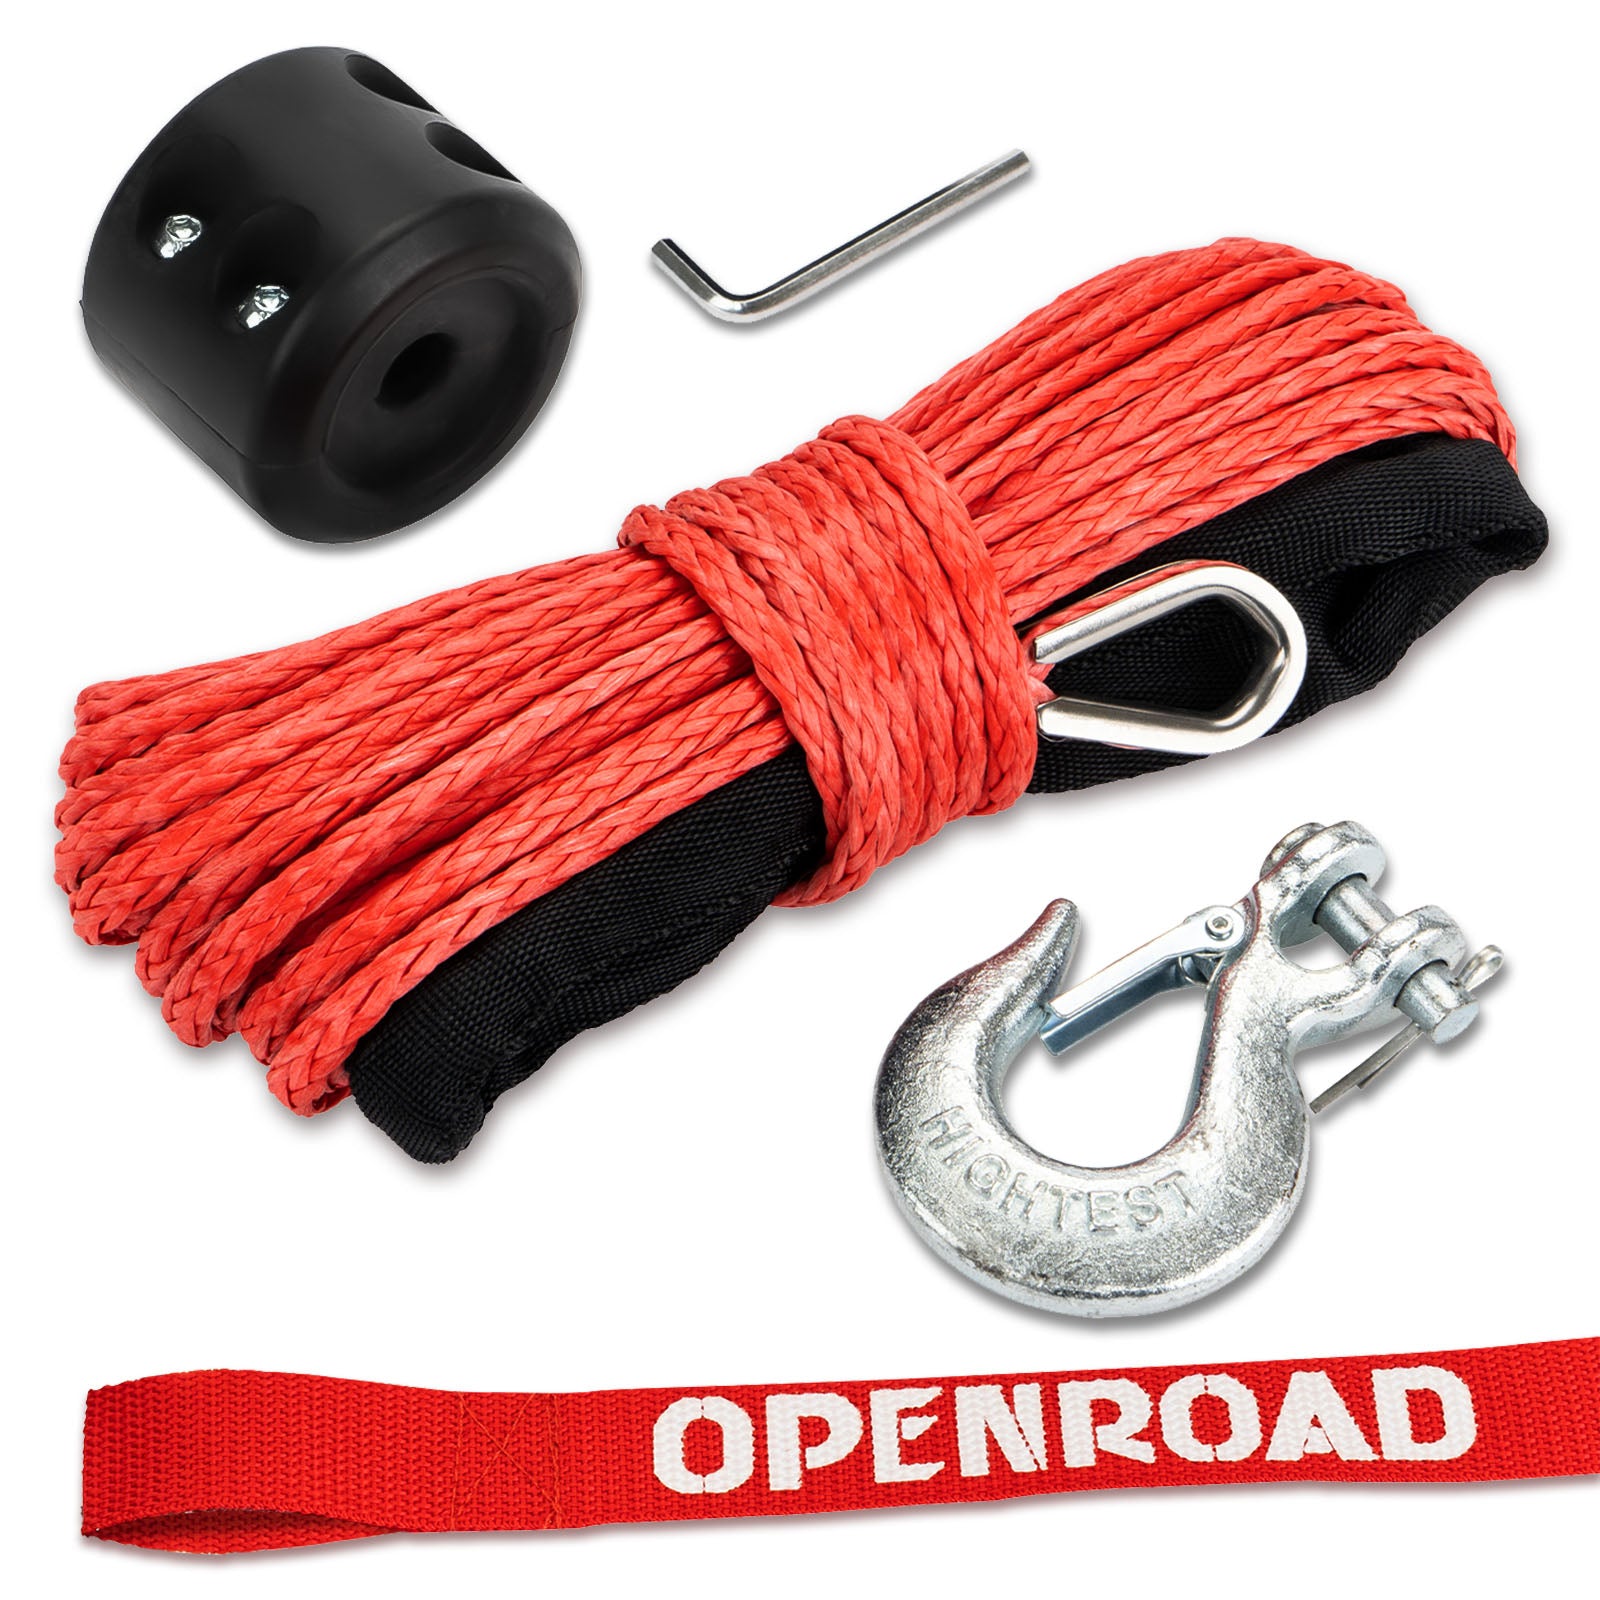 OPENROAD Synthetic Winch Rope 3/16'' x 50'Winch Rope Extension with Galvanized Removable Hook and ATV New Adjustable Rubber Blocks  openroad4wd.com Red  